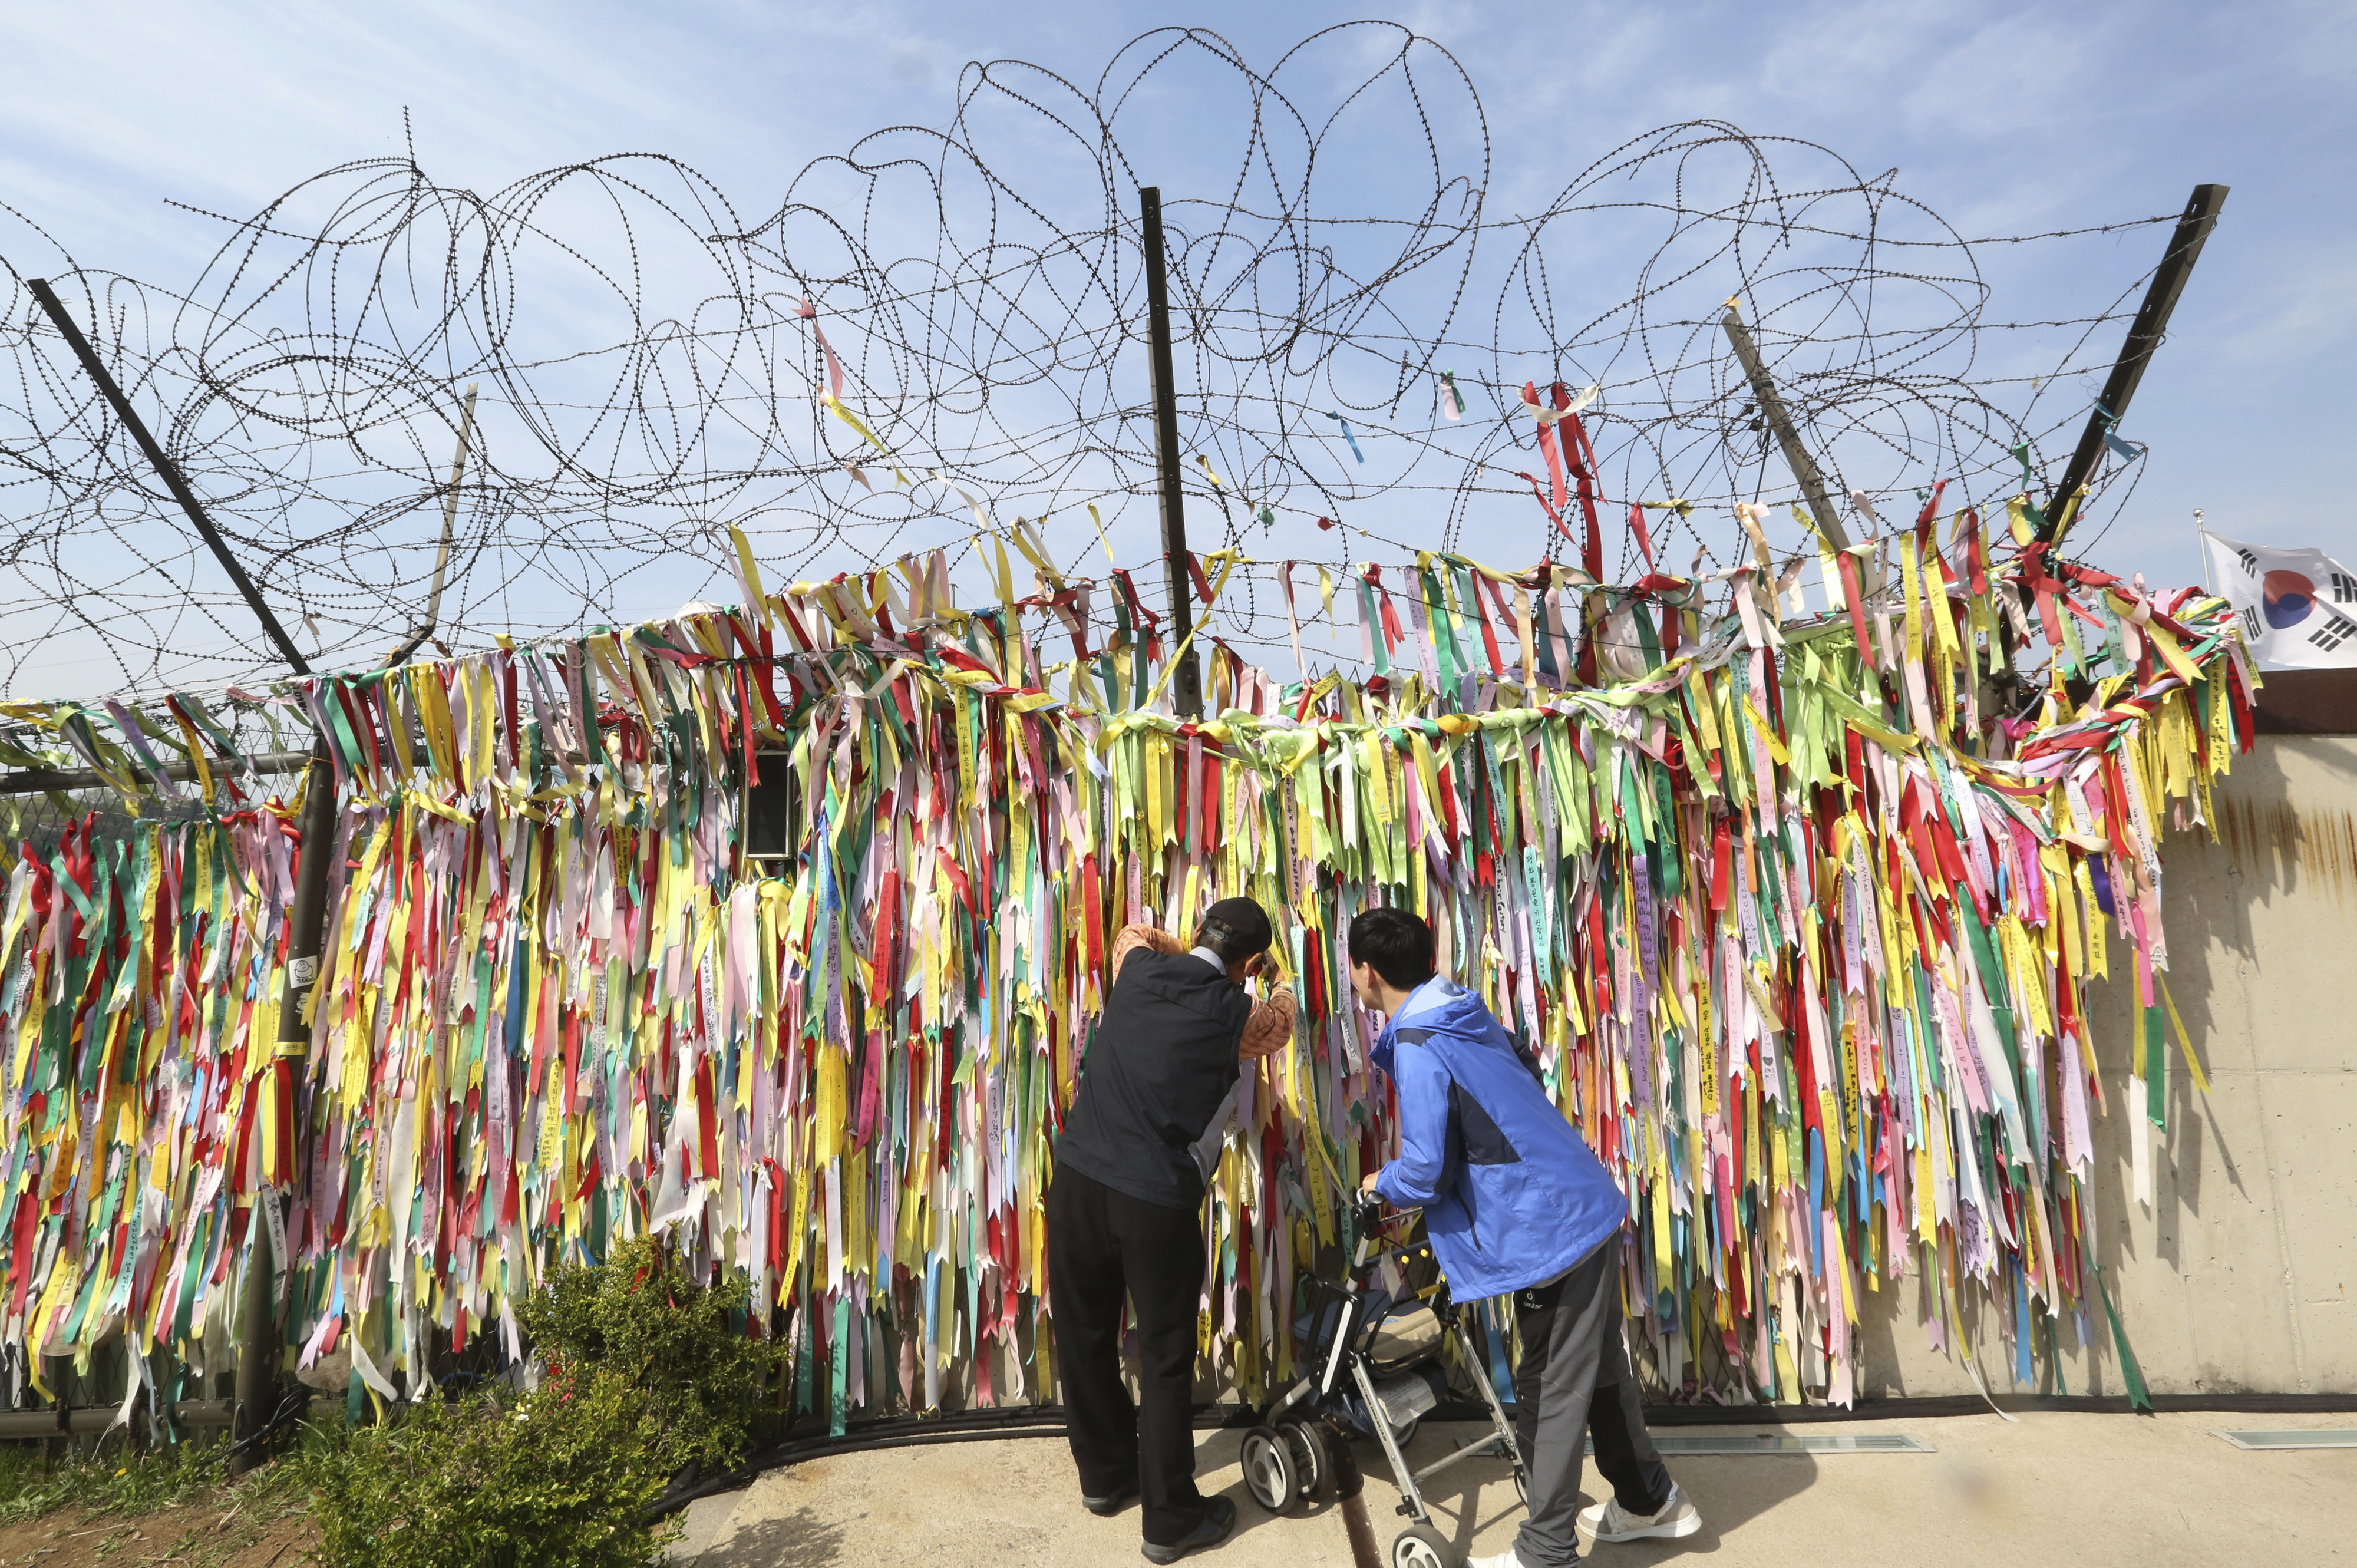 A man hangs a ribbon carrying messages wishing the reunification and peace of the two Koreas on the wire fence at the Imjingak Pavilion in Paju, near the border with North Korea, South Korea, Thursday, April 26, 2018. North Korean leader Kim Jong Un and South Korean President Moon Jae-in will plant a commemorative tree and inspect an honor guard together after Kim walks across the border Friday for their historic summit, Seoul officials said Thursday. (AP Photo/Ahn Young-joon)